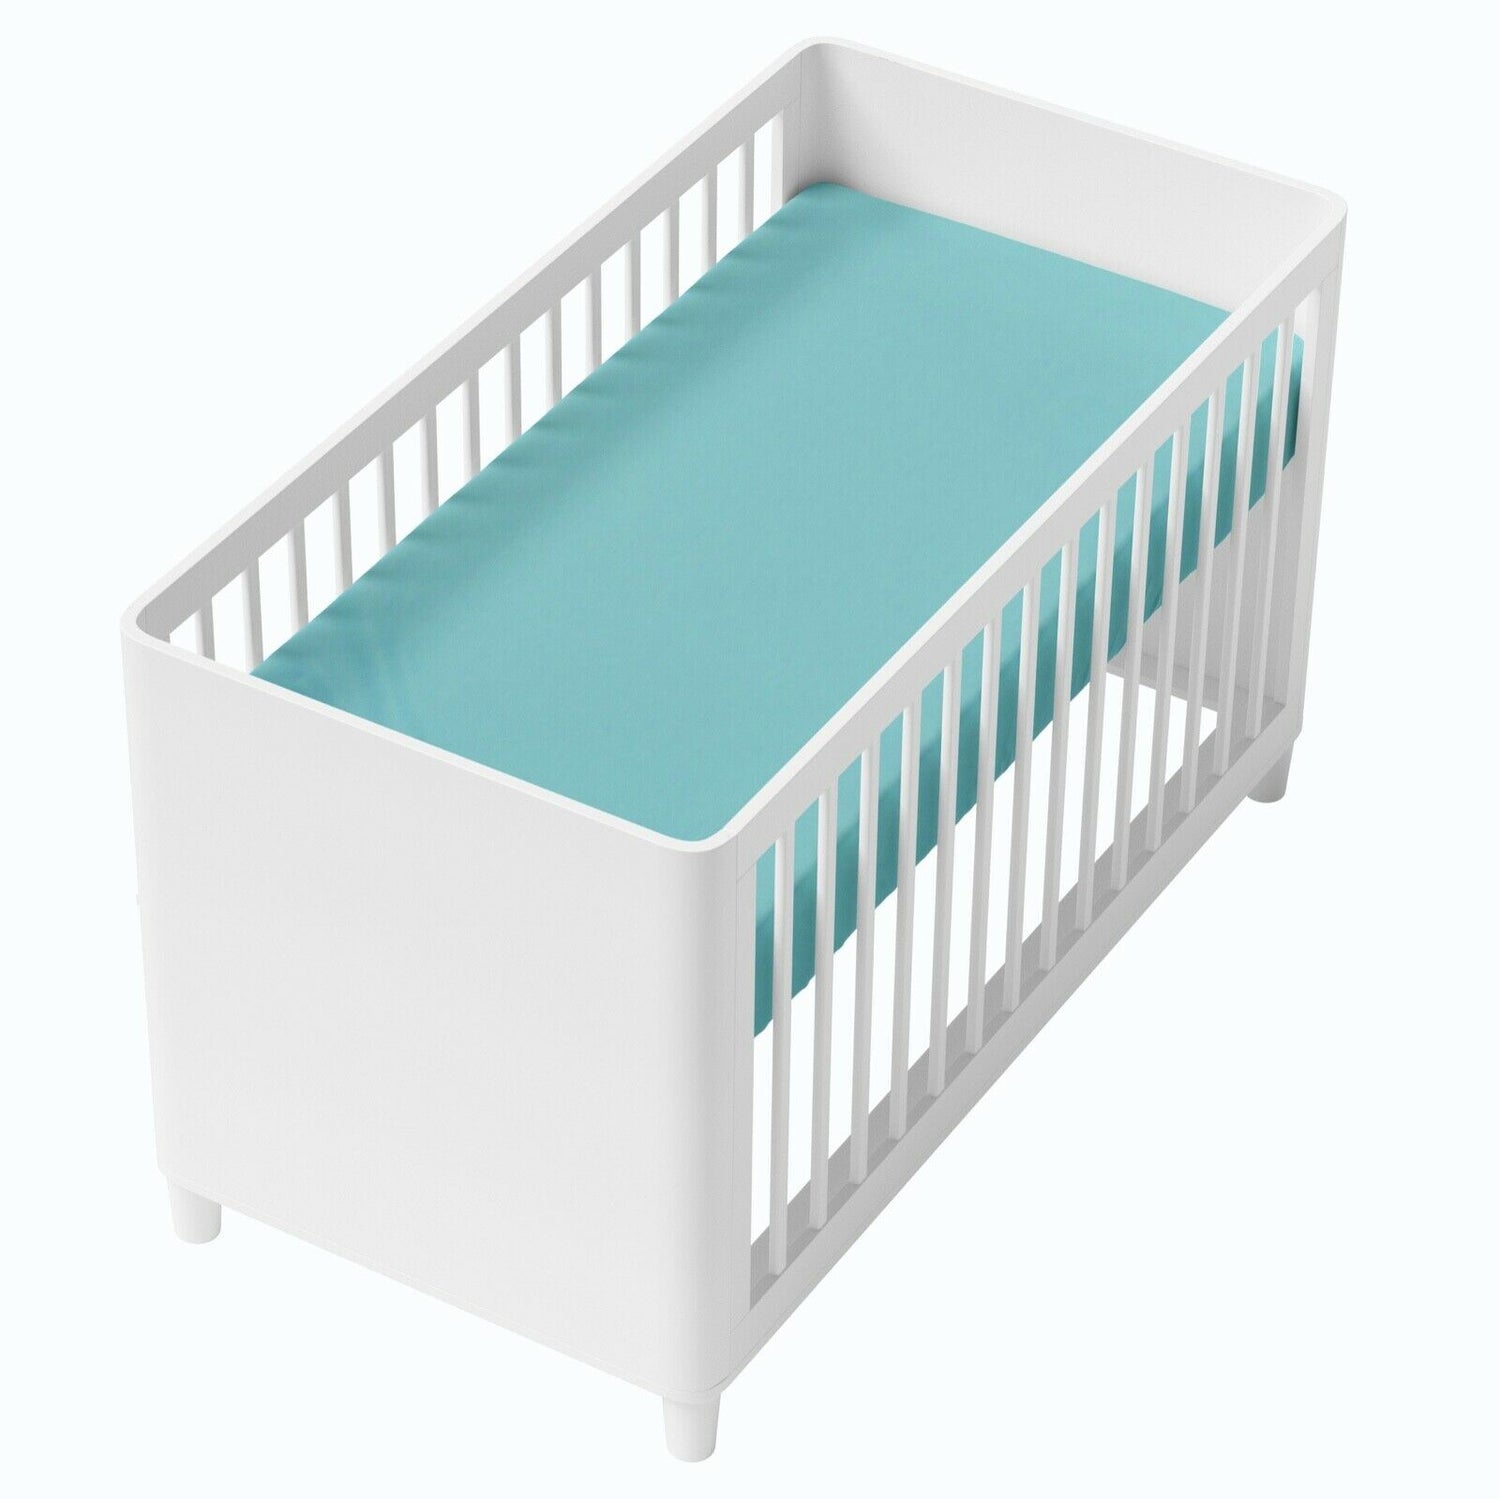 2-pack soft fitted sheet jersey stretchy cotton fit Crib/Cradle 90x40 Blue